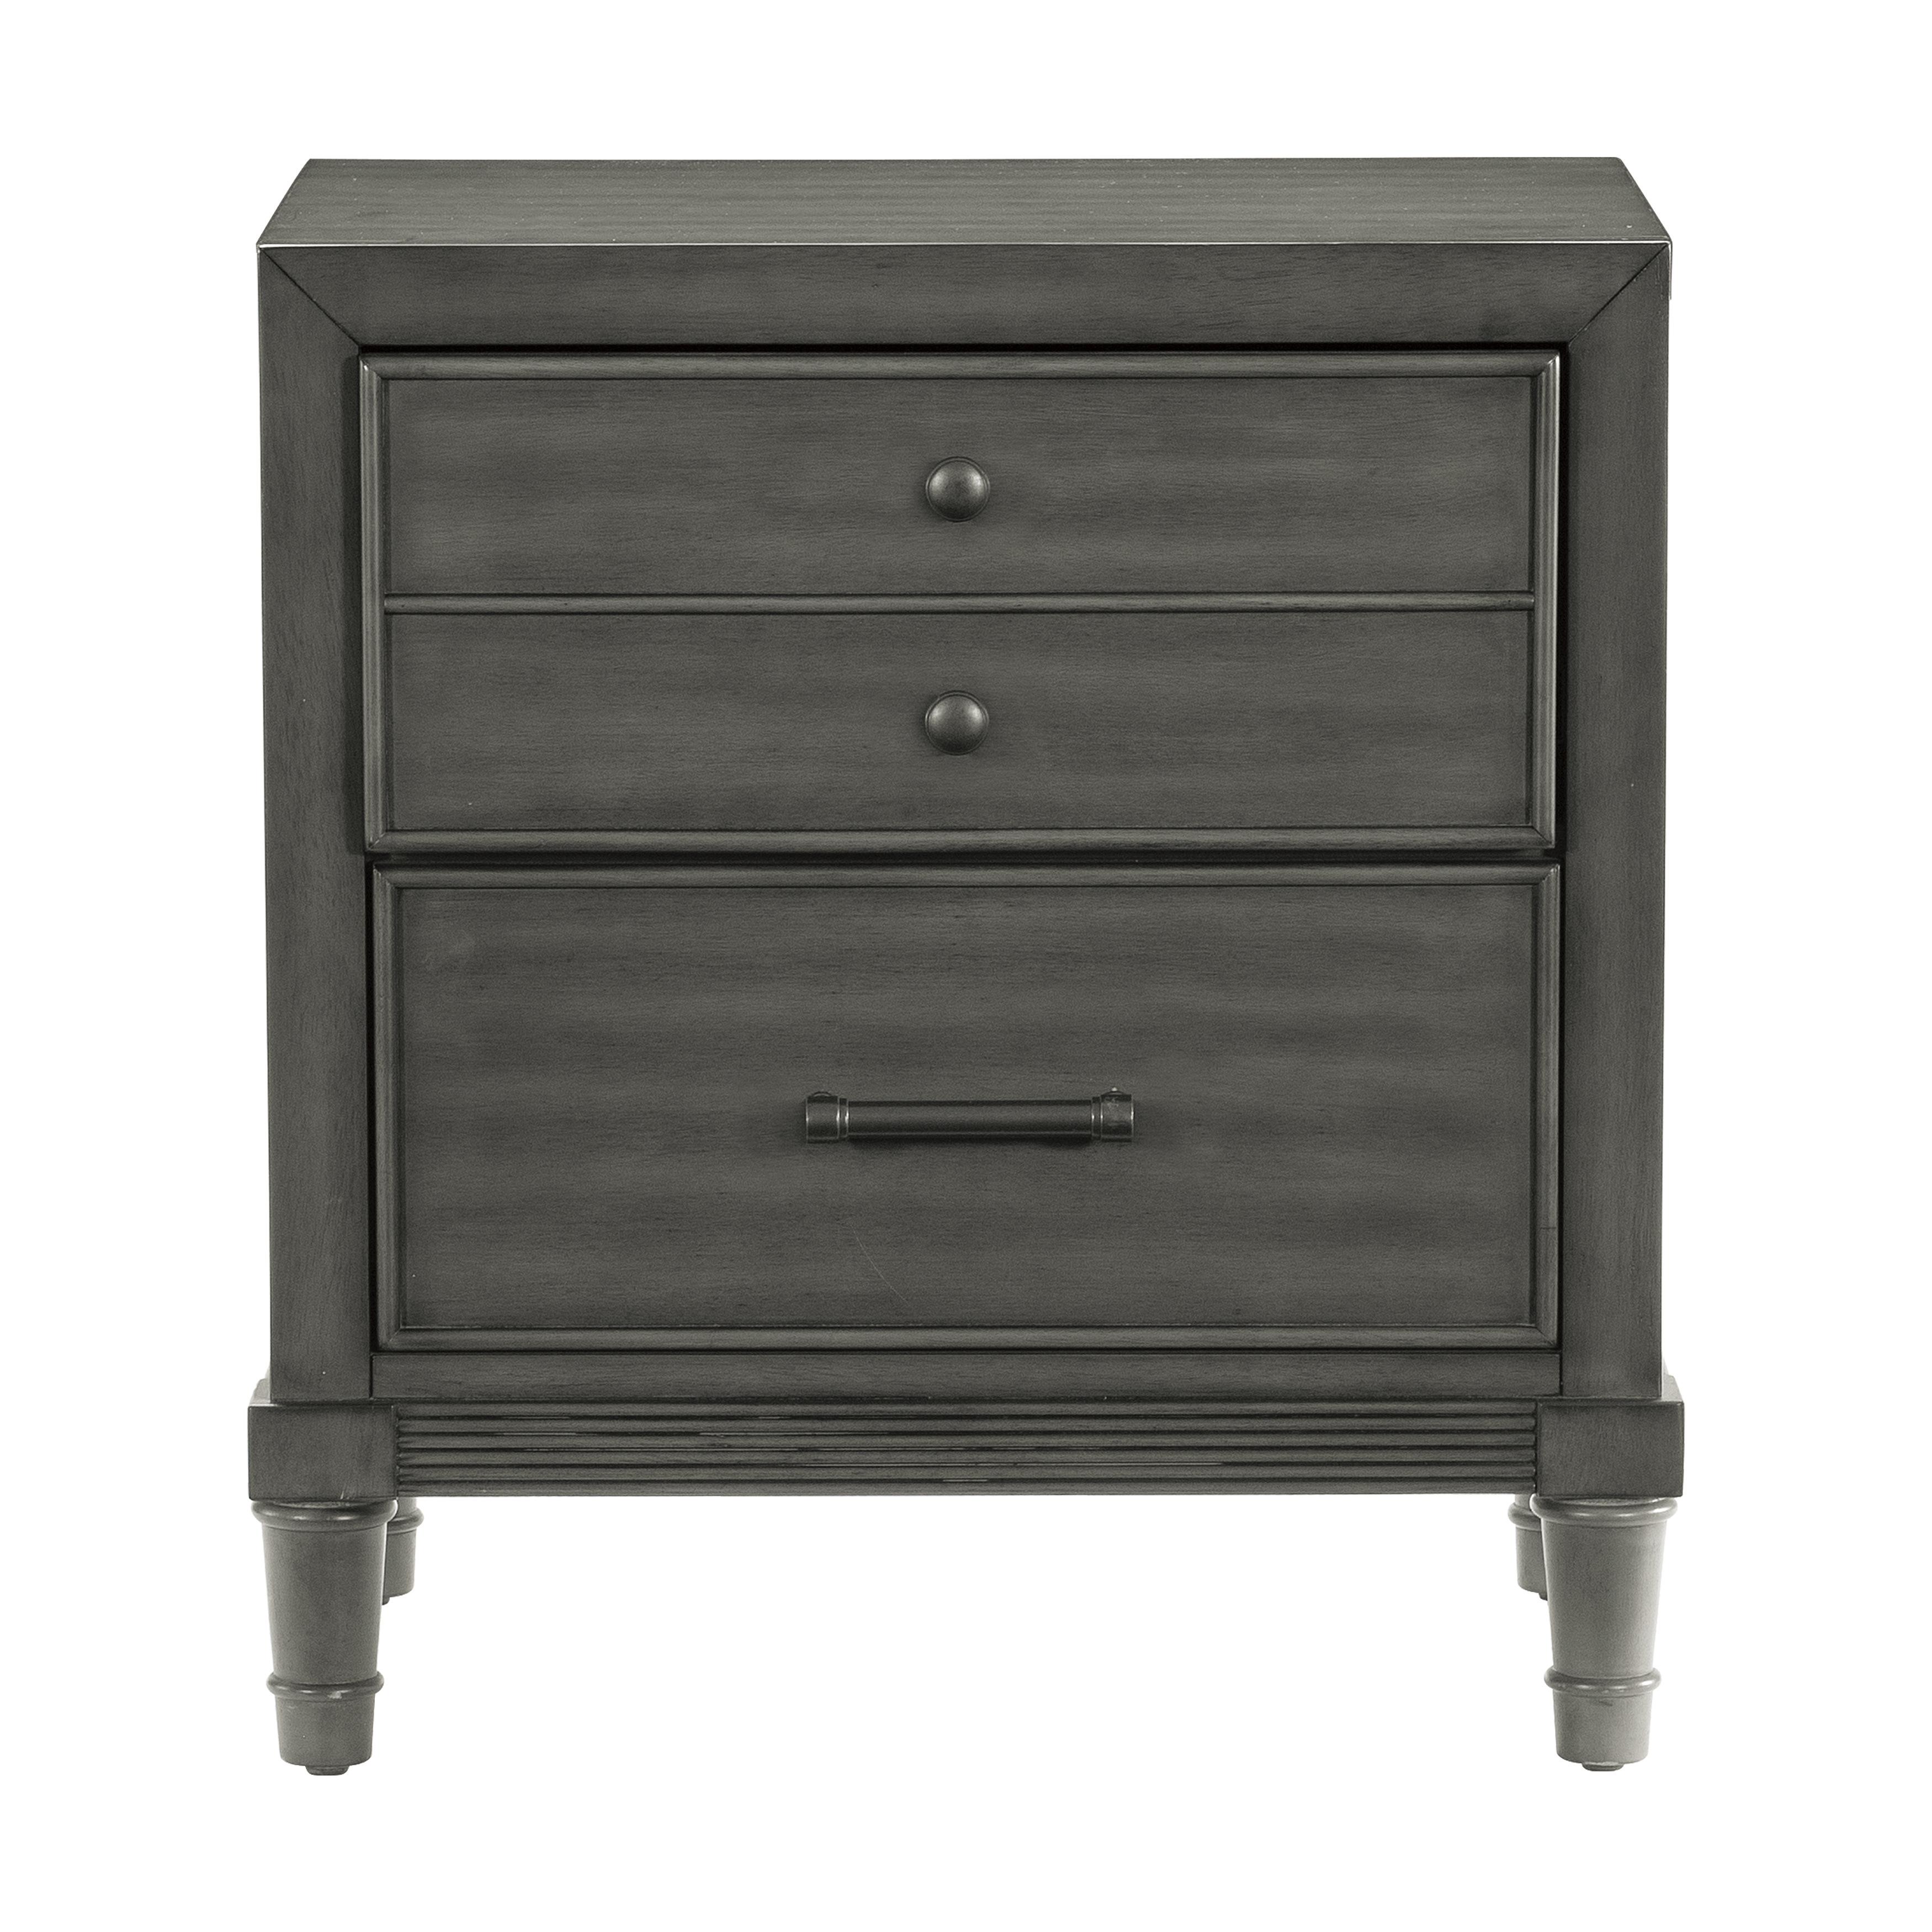 Transitional Nightstand 1573-4 Wittenberry 1573-4 in Gray 